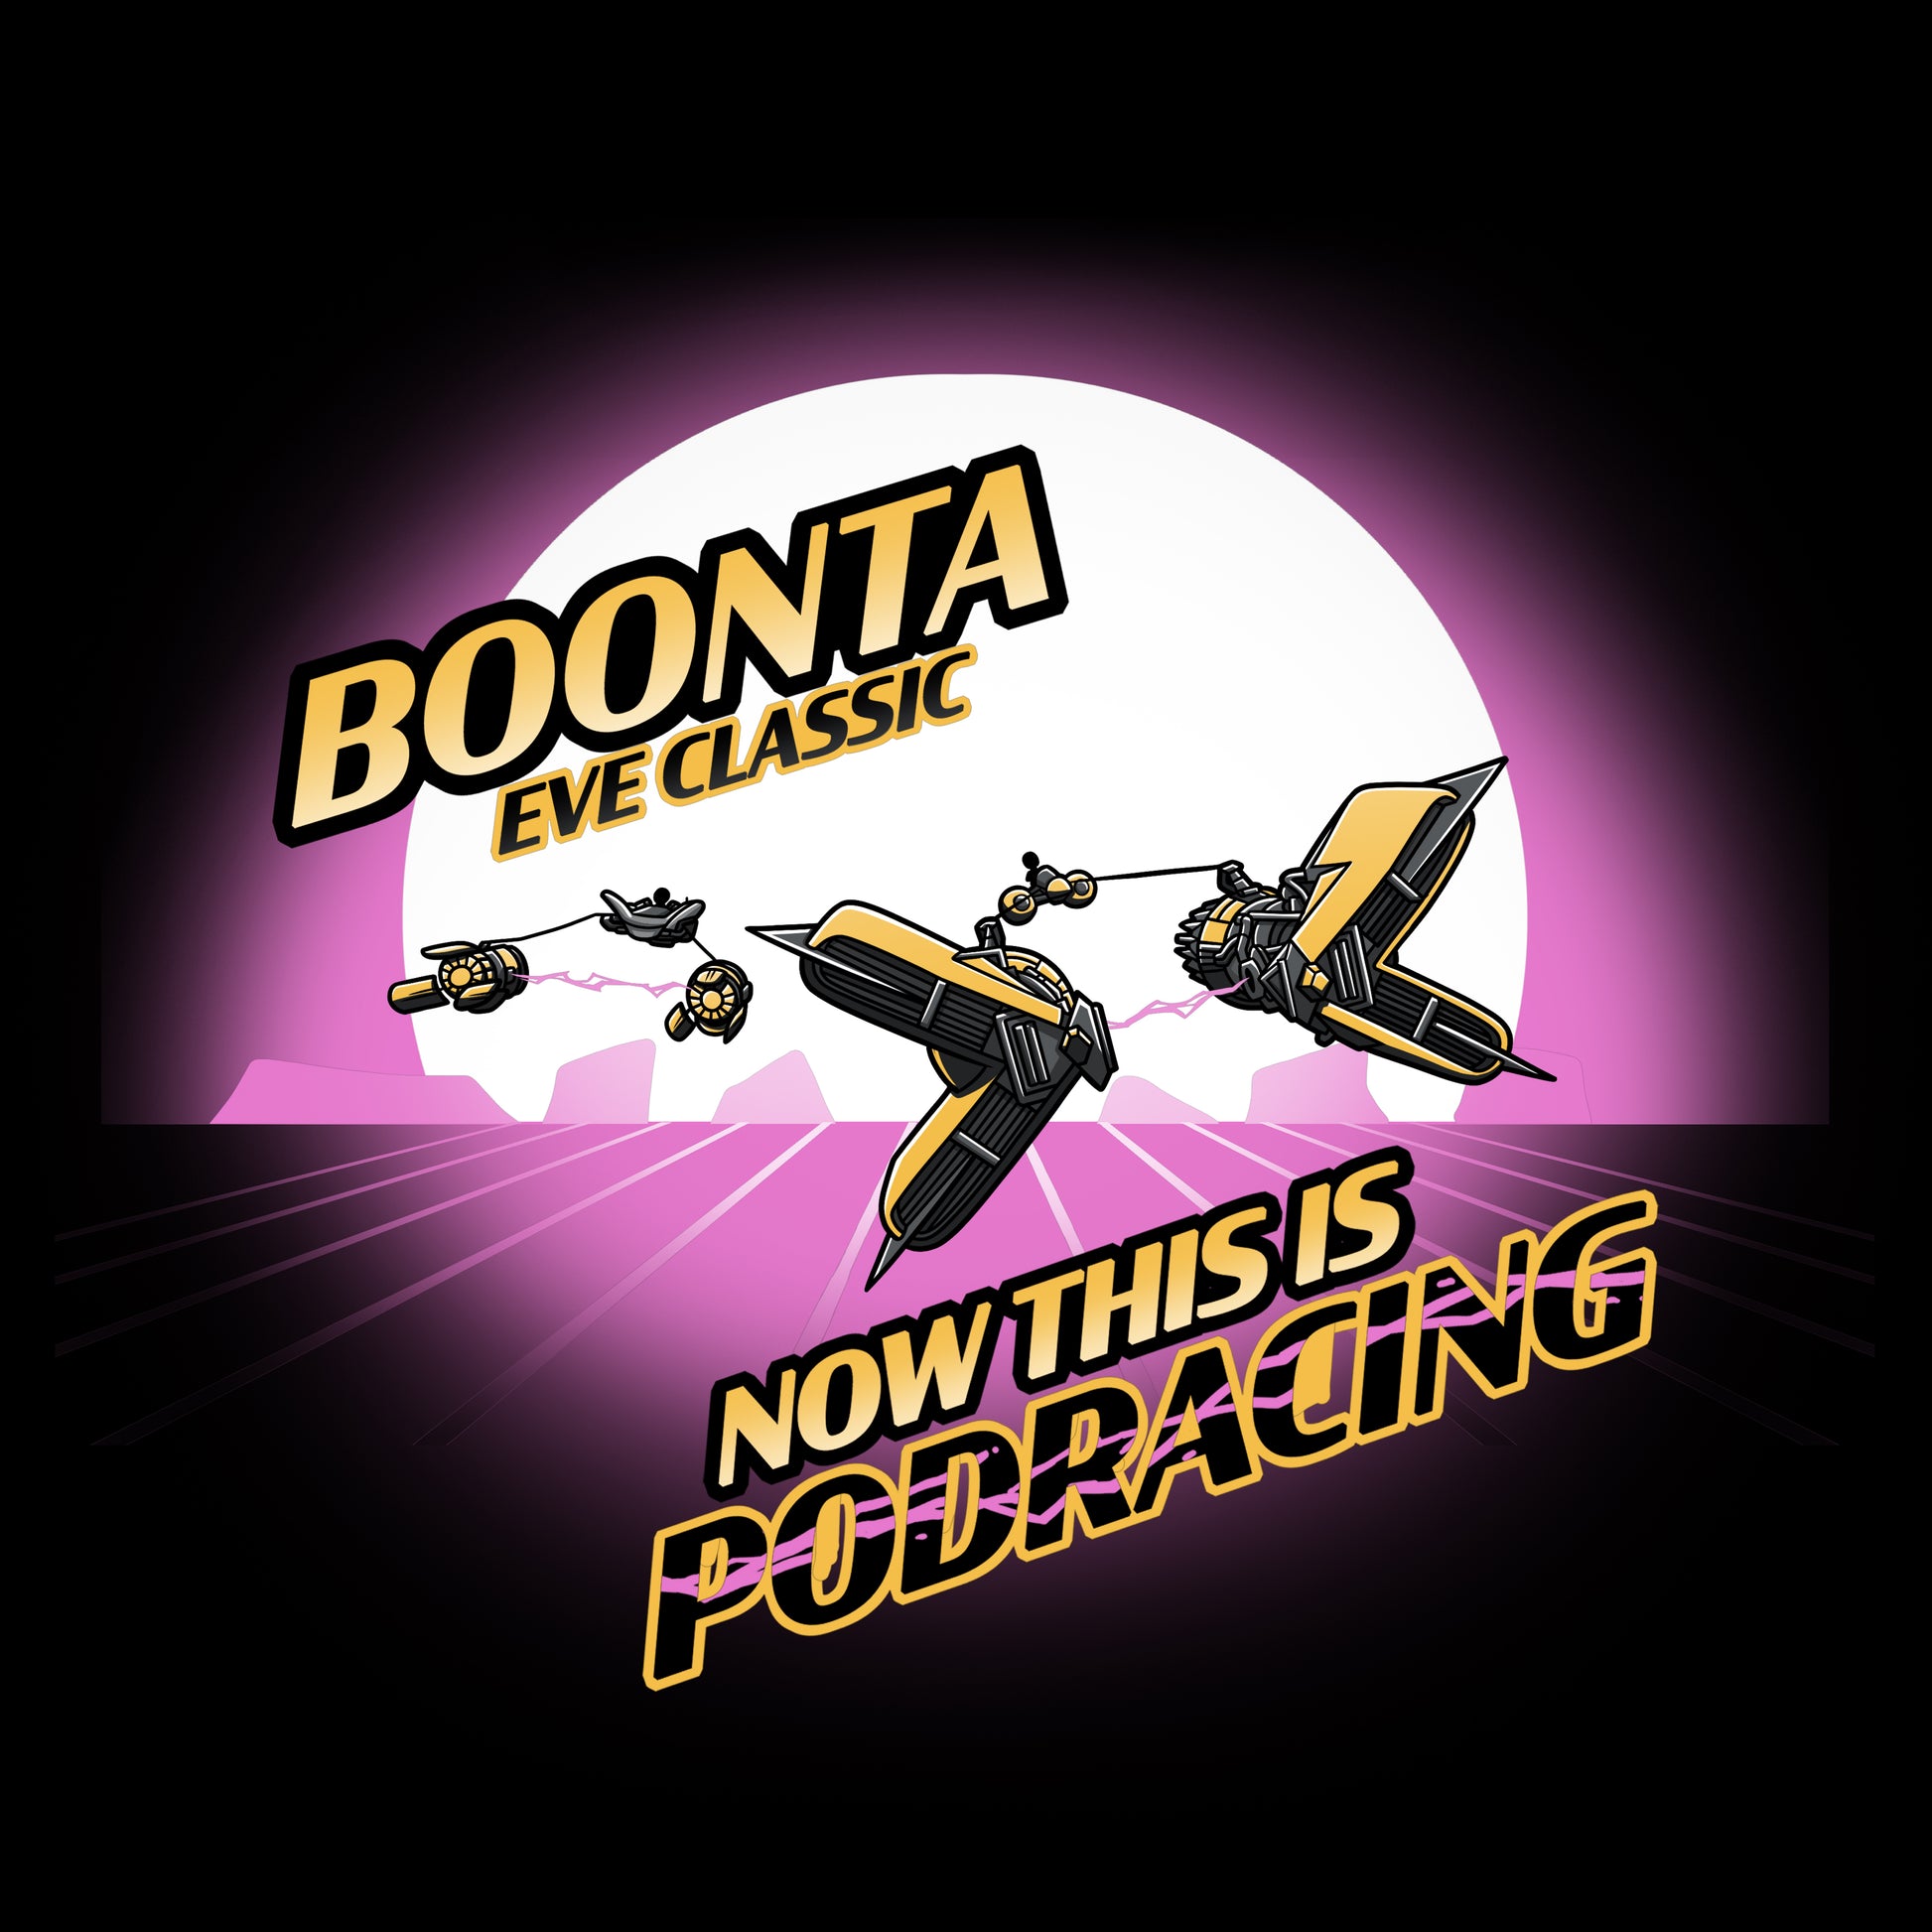 Officially Licensed Star Wars Boonta Eve Classic.